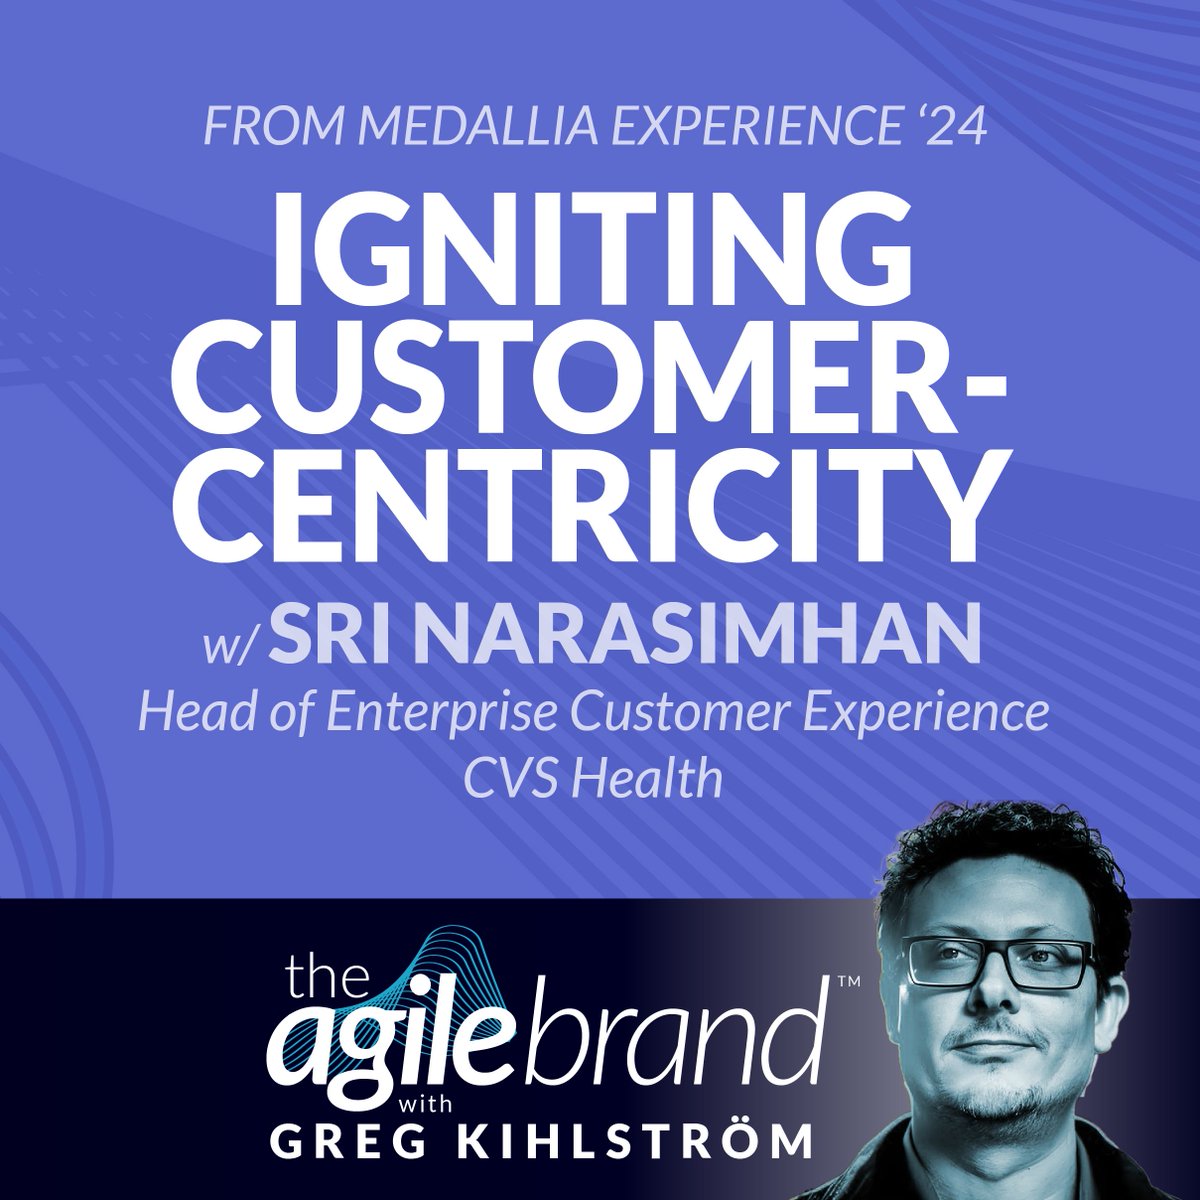 🔊  EPISODE 486: buff.ly/49lxIHB  @gregkihlstrom talks with Sri Narasimhan from CVS Health about building a culture of customer-centricity on the latest #podcast episode. 🎧 

#customerdata #CX #CustomerService #CustomerExperience #marketingpodcast #martechpodcast